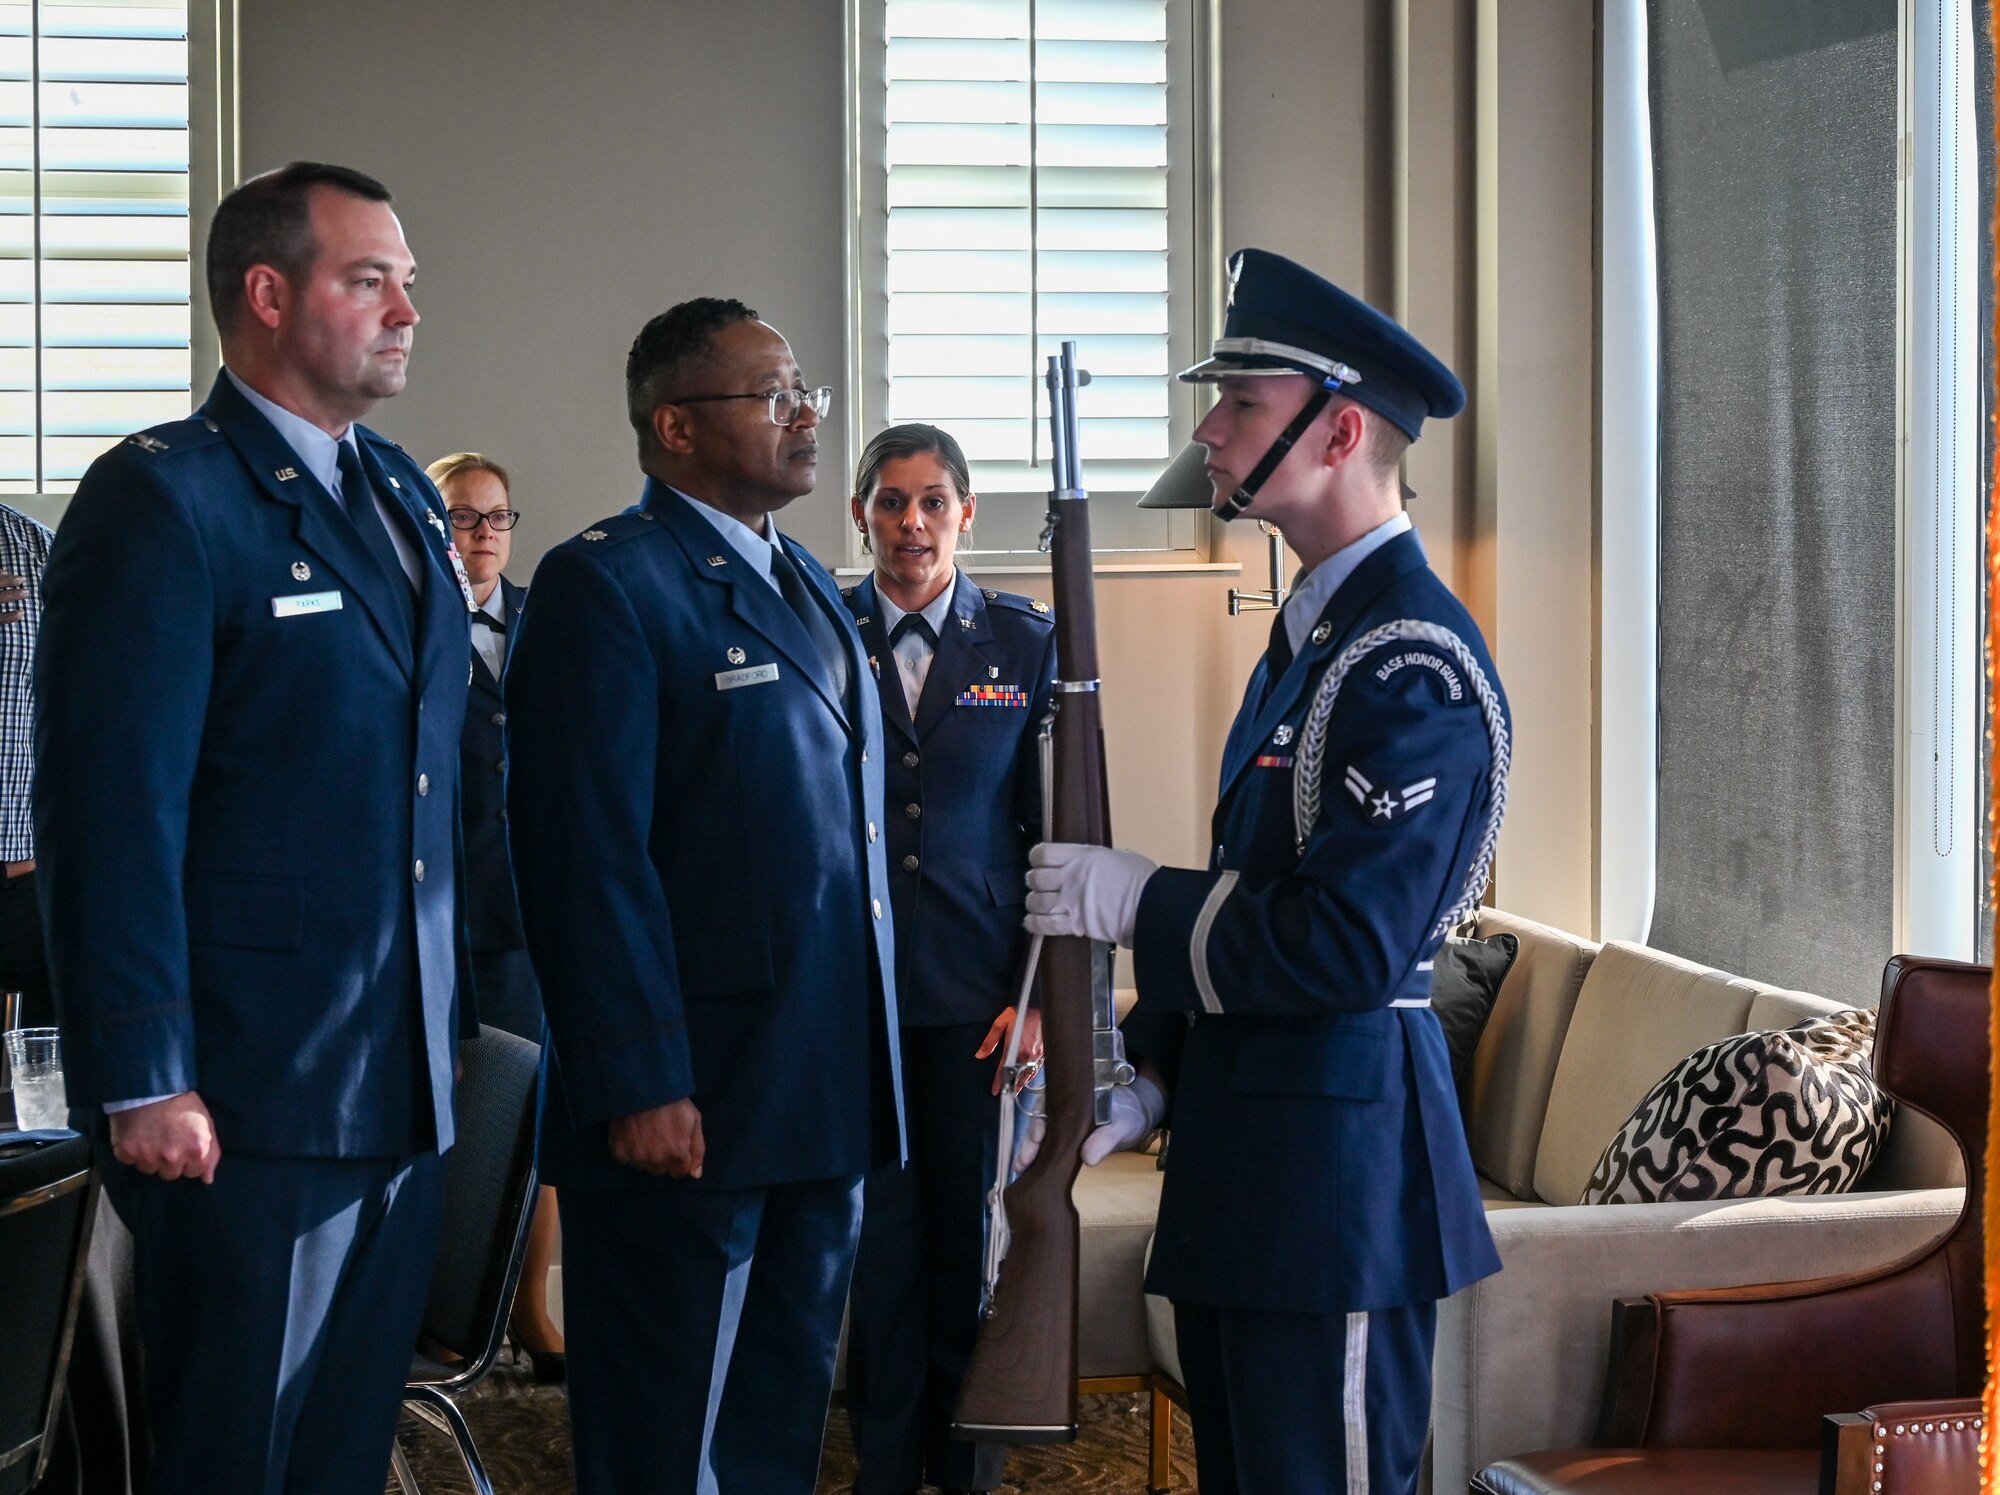 Lt. Col. Alvin Bradford, 507th Medical Squadron commander, promotes to the rank of colonel during a promotion ceremony September 30, 2022, Oklahoma City, Oklahoma. (U.S. Air Force photo by 2nd Lt. Mary Begy)